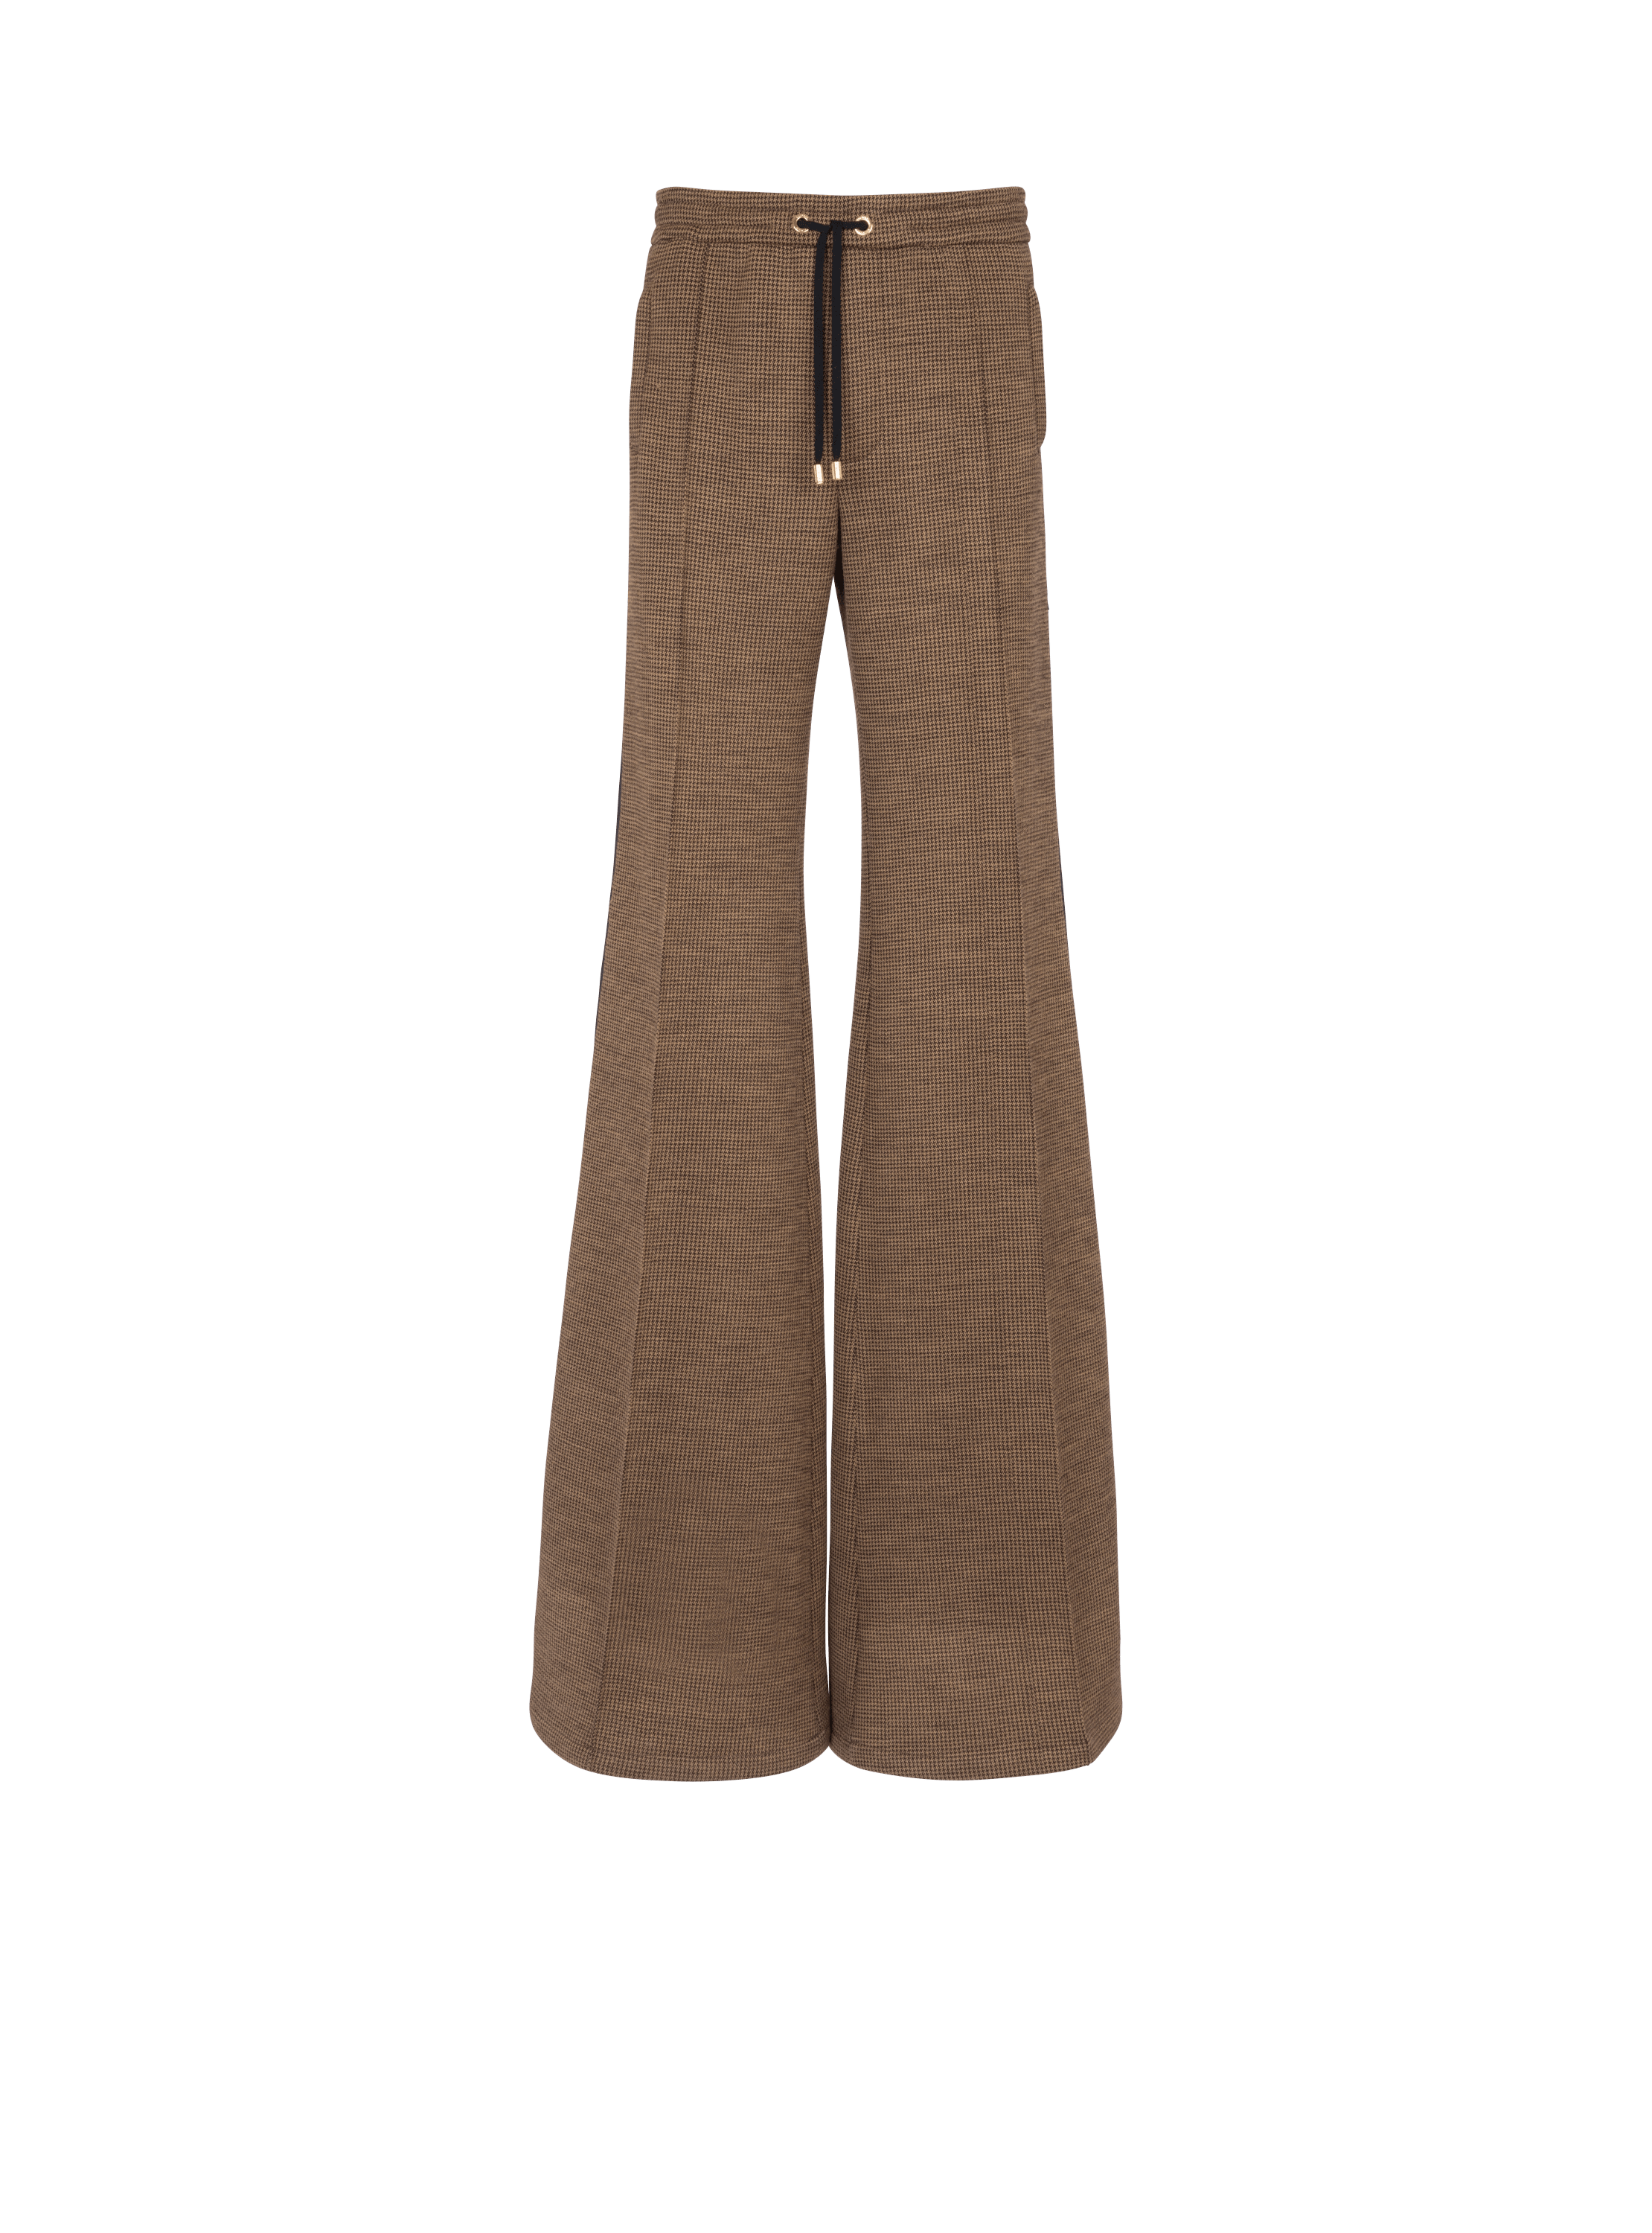 Casual houndstooth jacquard trousers